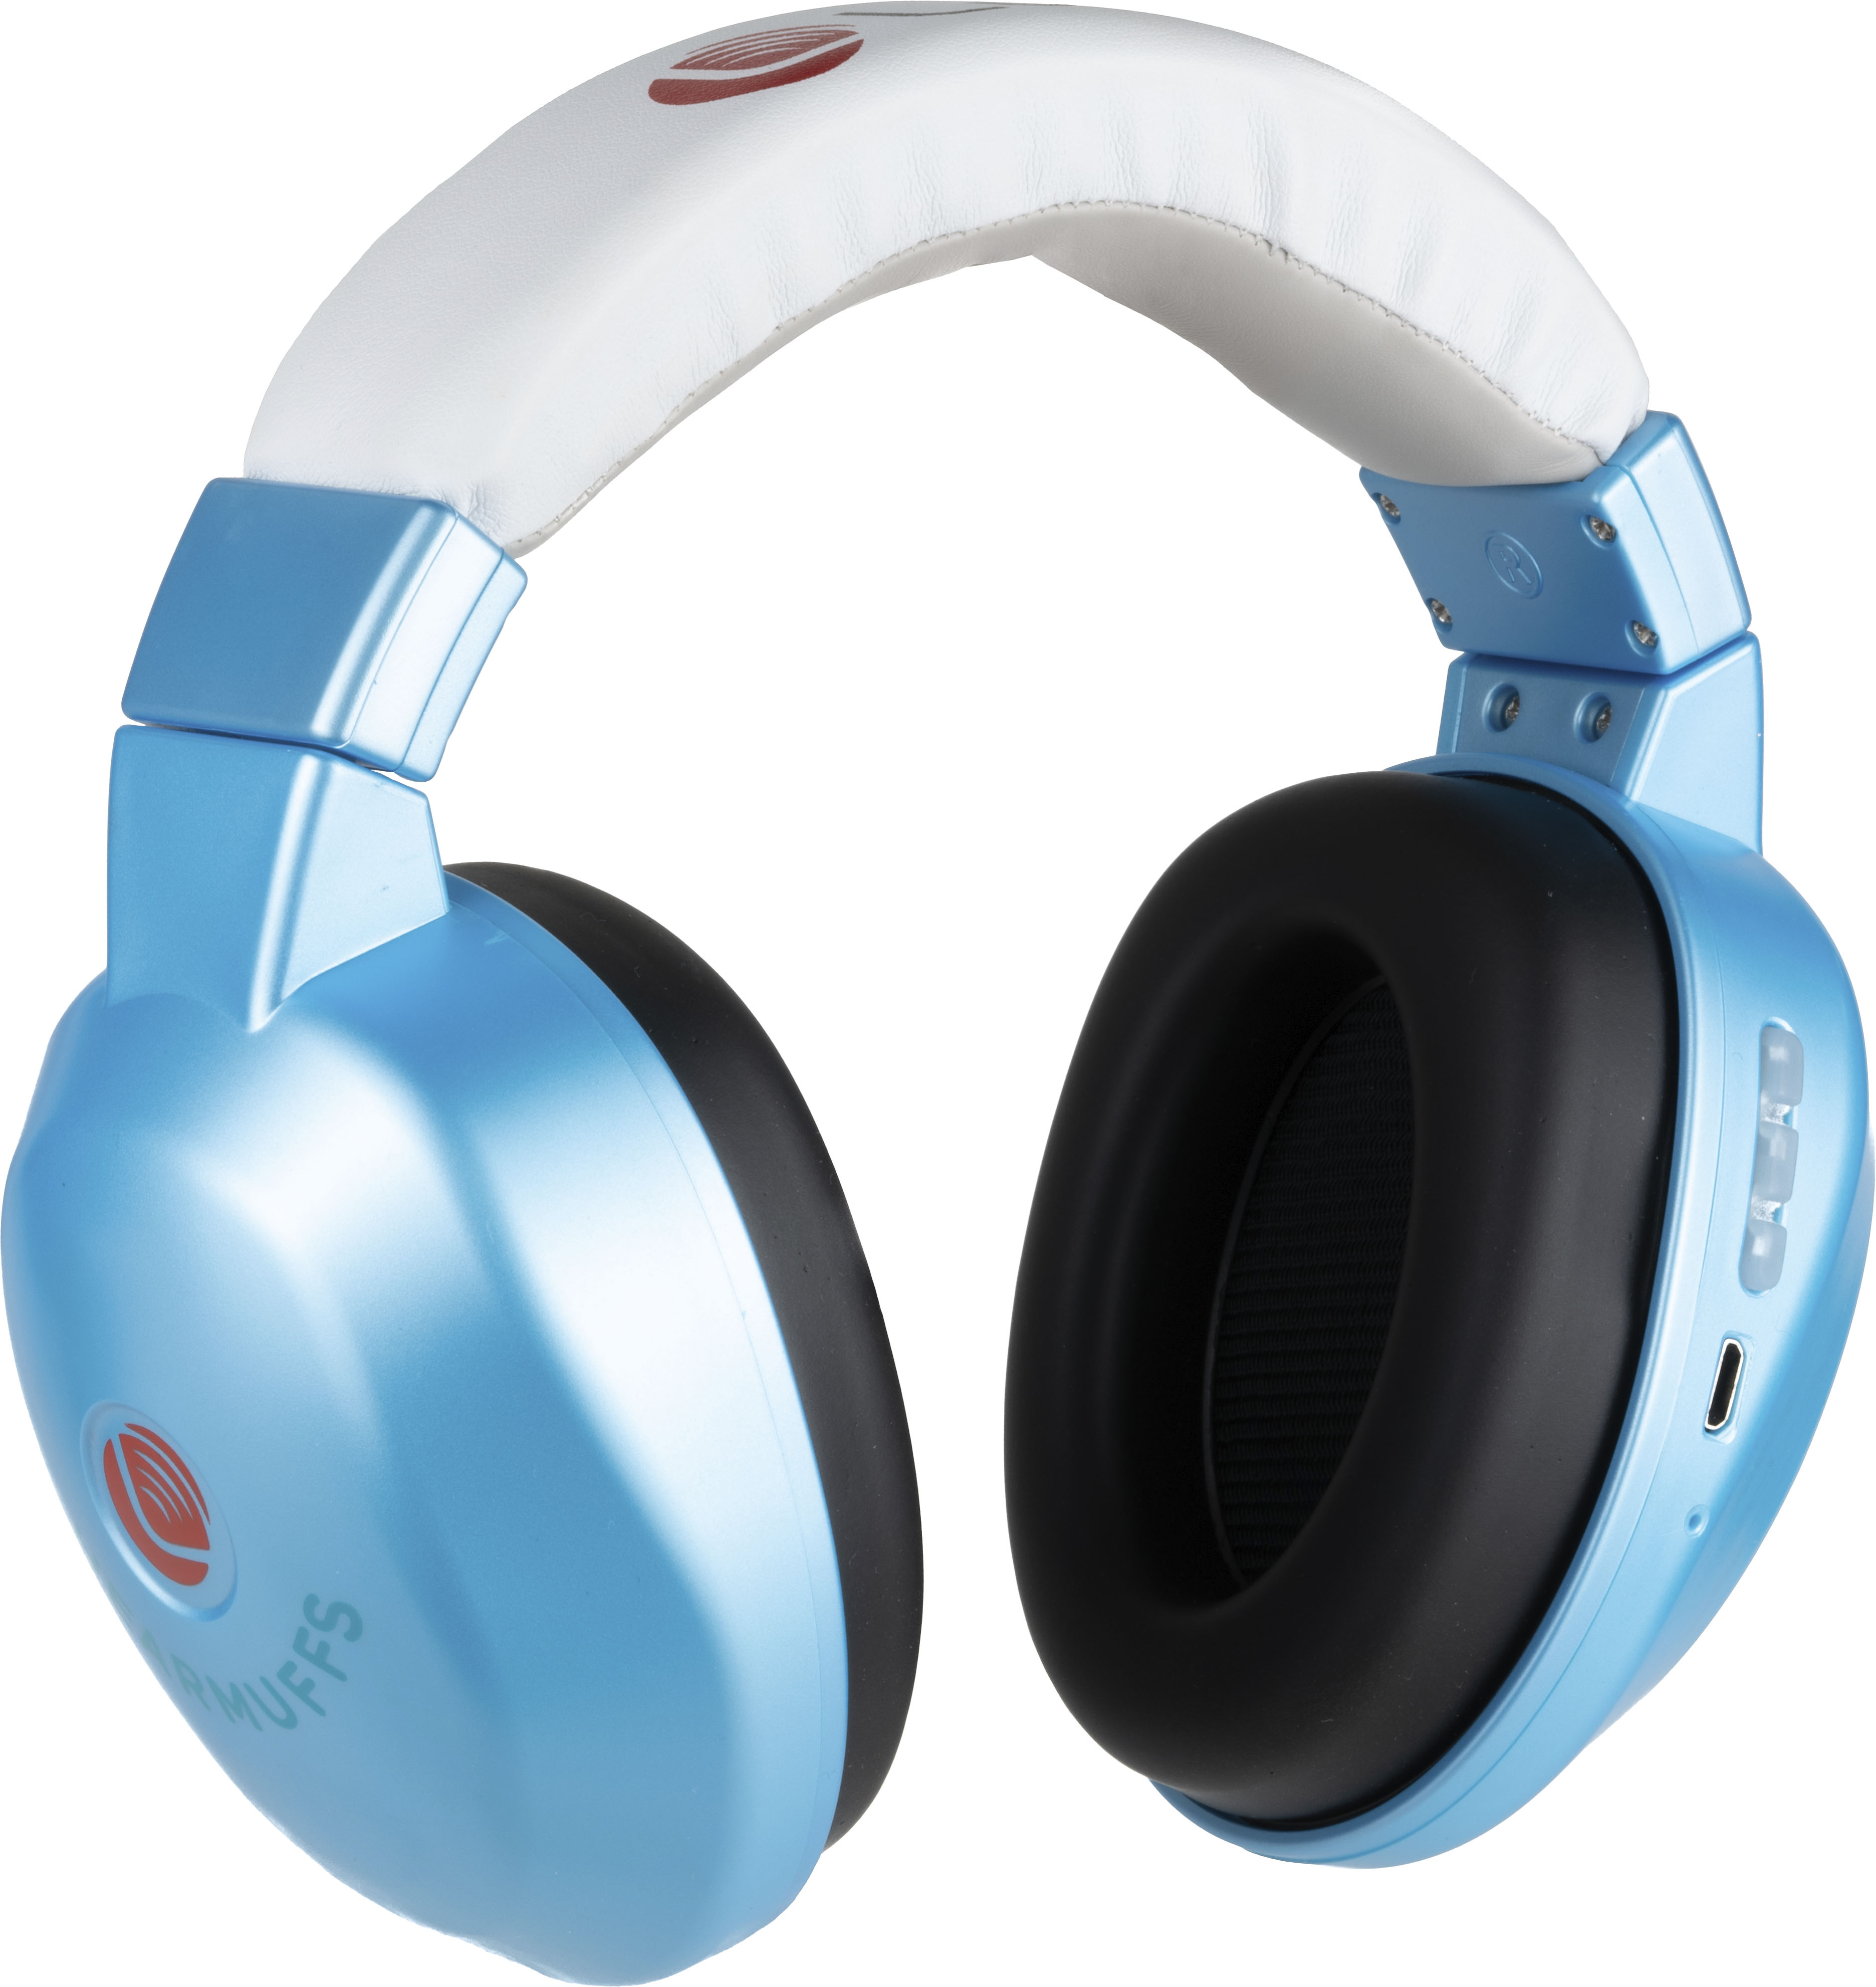 Angle View: Lucid Hearing - Bluetooth HearMuffs for Infant/Toddler - Hearing Protection for Infant/Toddler 0-4 Years Old - BLUE